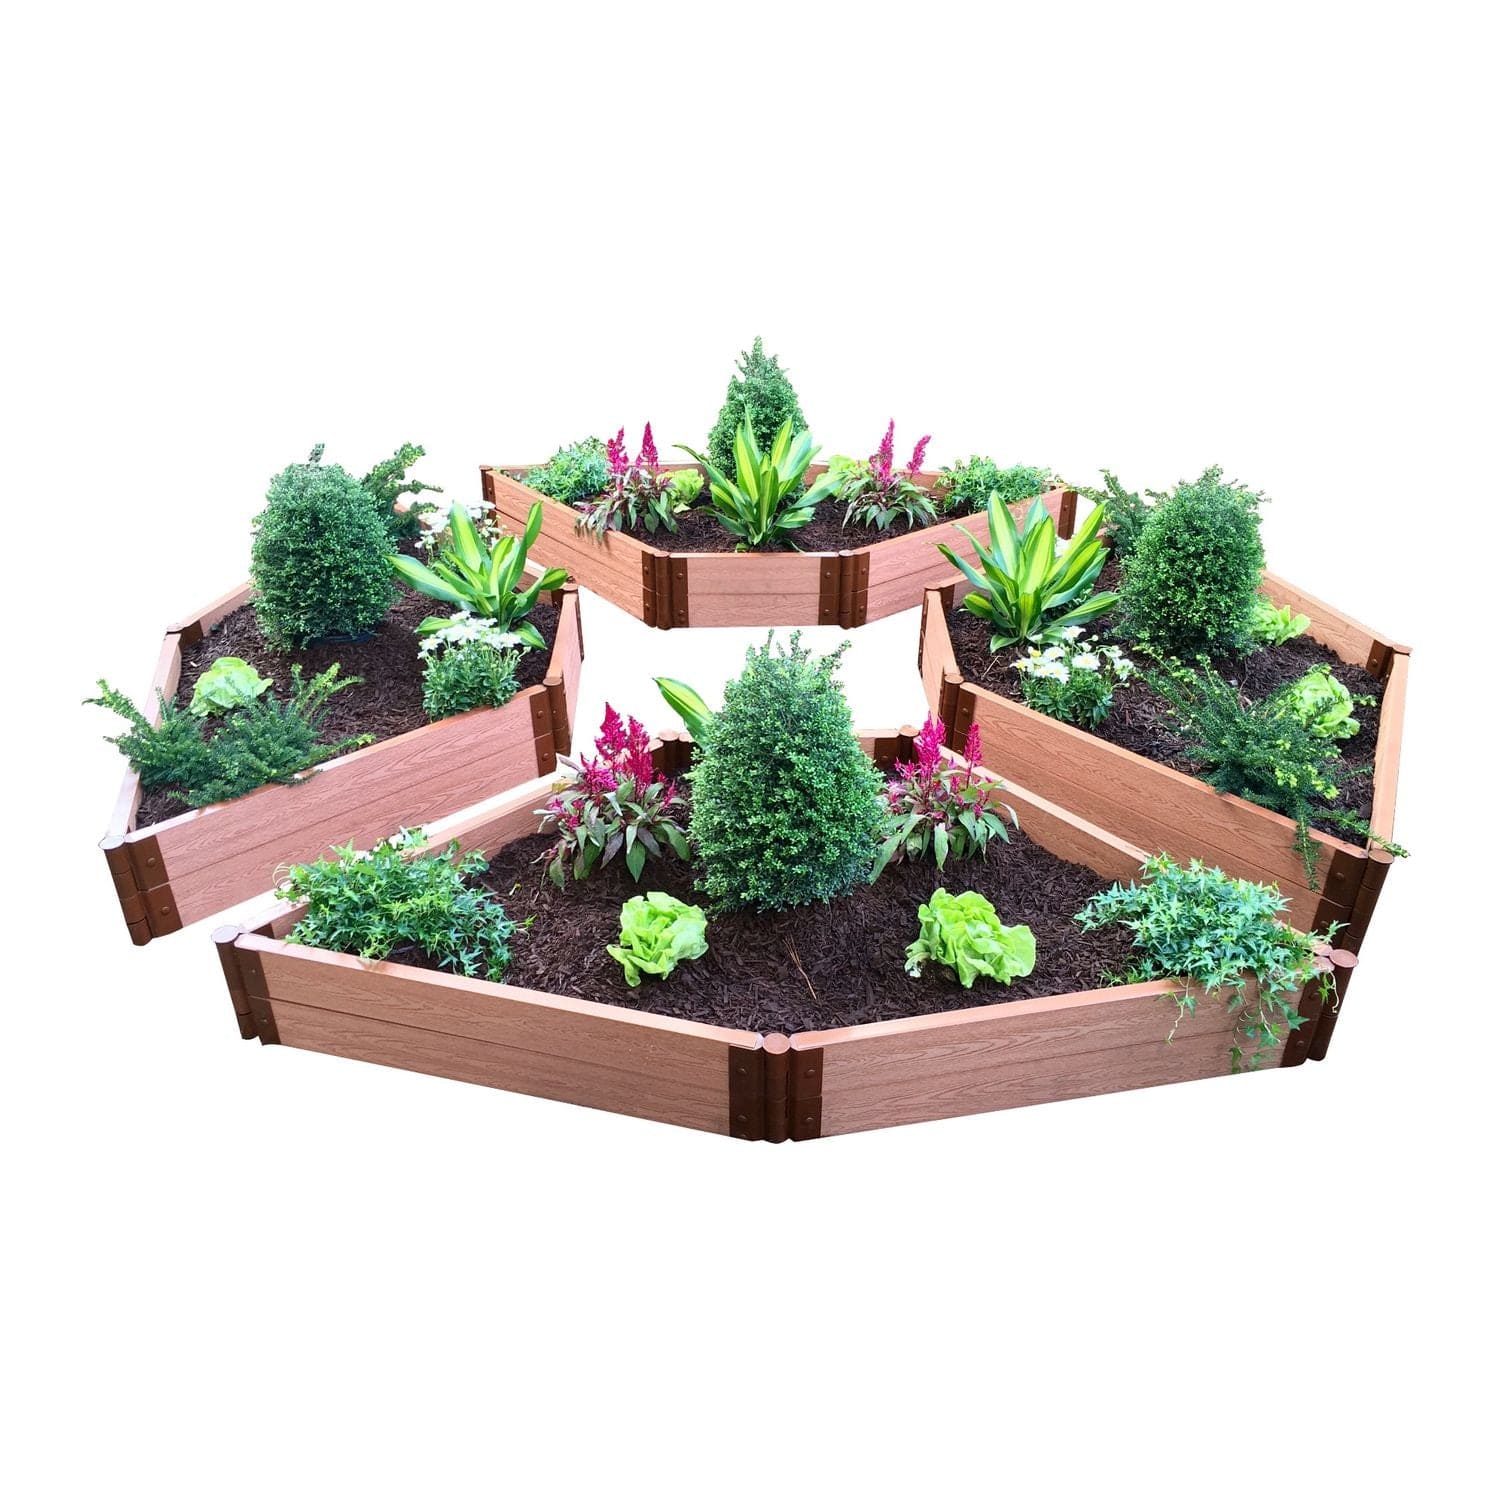 Frame It All Gardening Accessories Frame It All | Tool-Free Elizabethan Garden Raised Garden Bed (4-Sided Triangle) 12' X 12' X 22" - Weathered Wood - 1" Profile 200004476